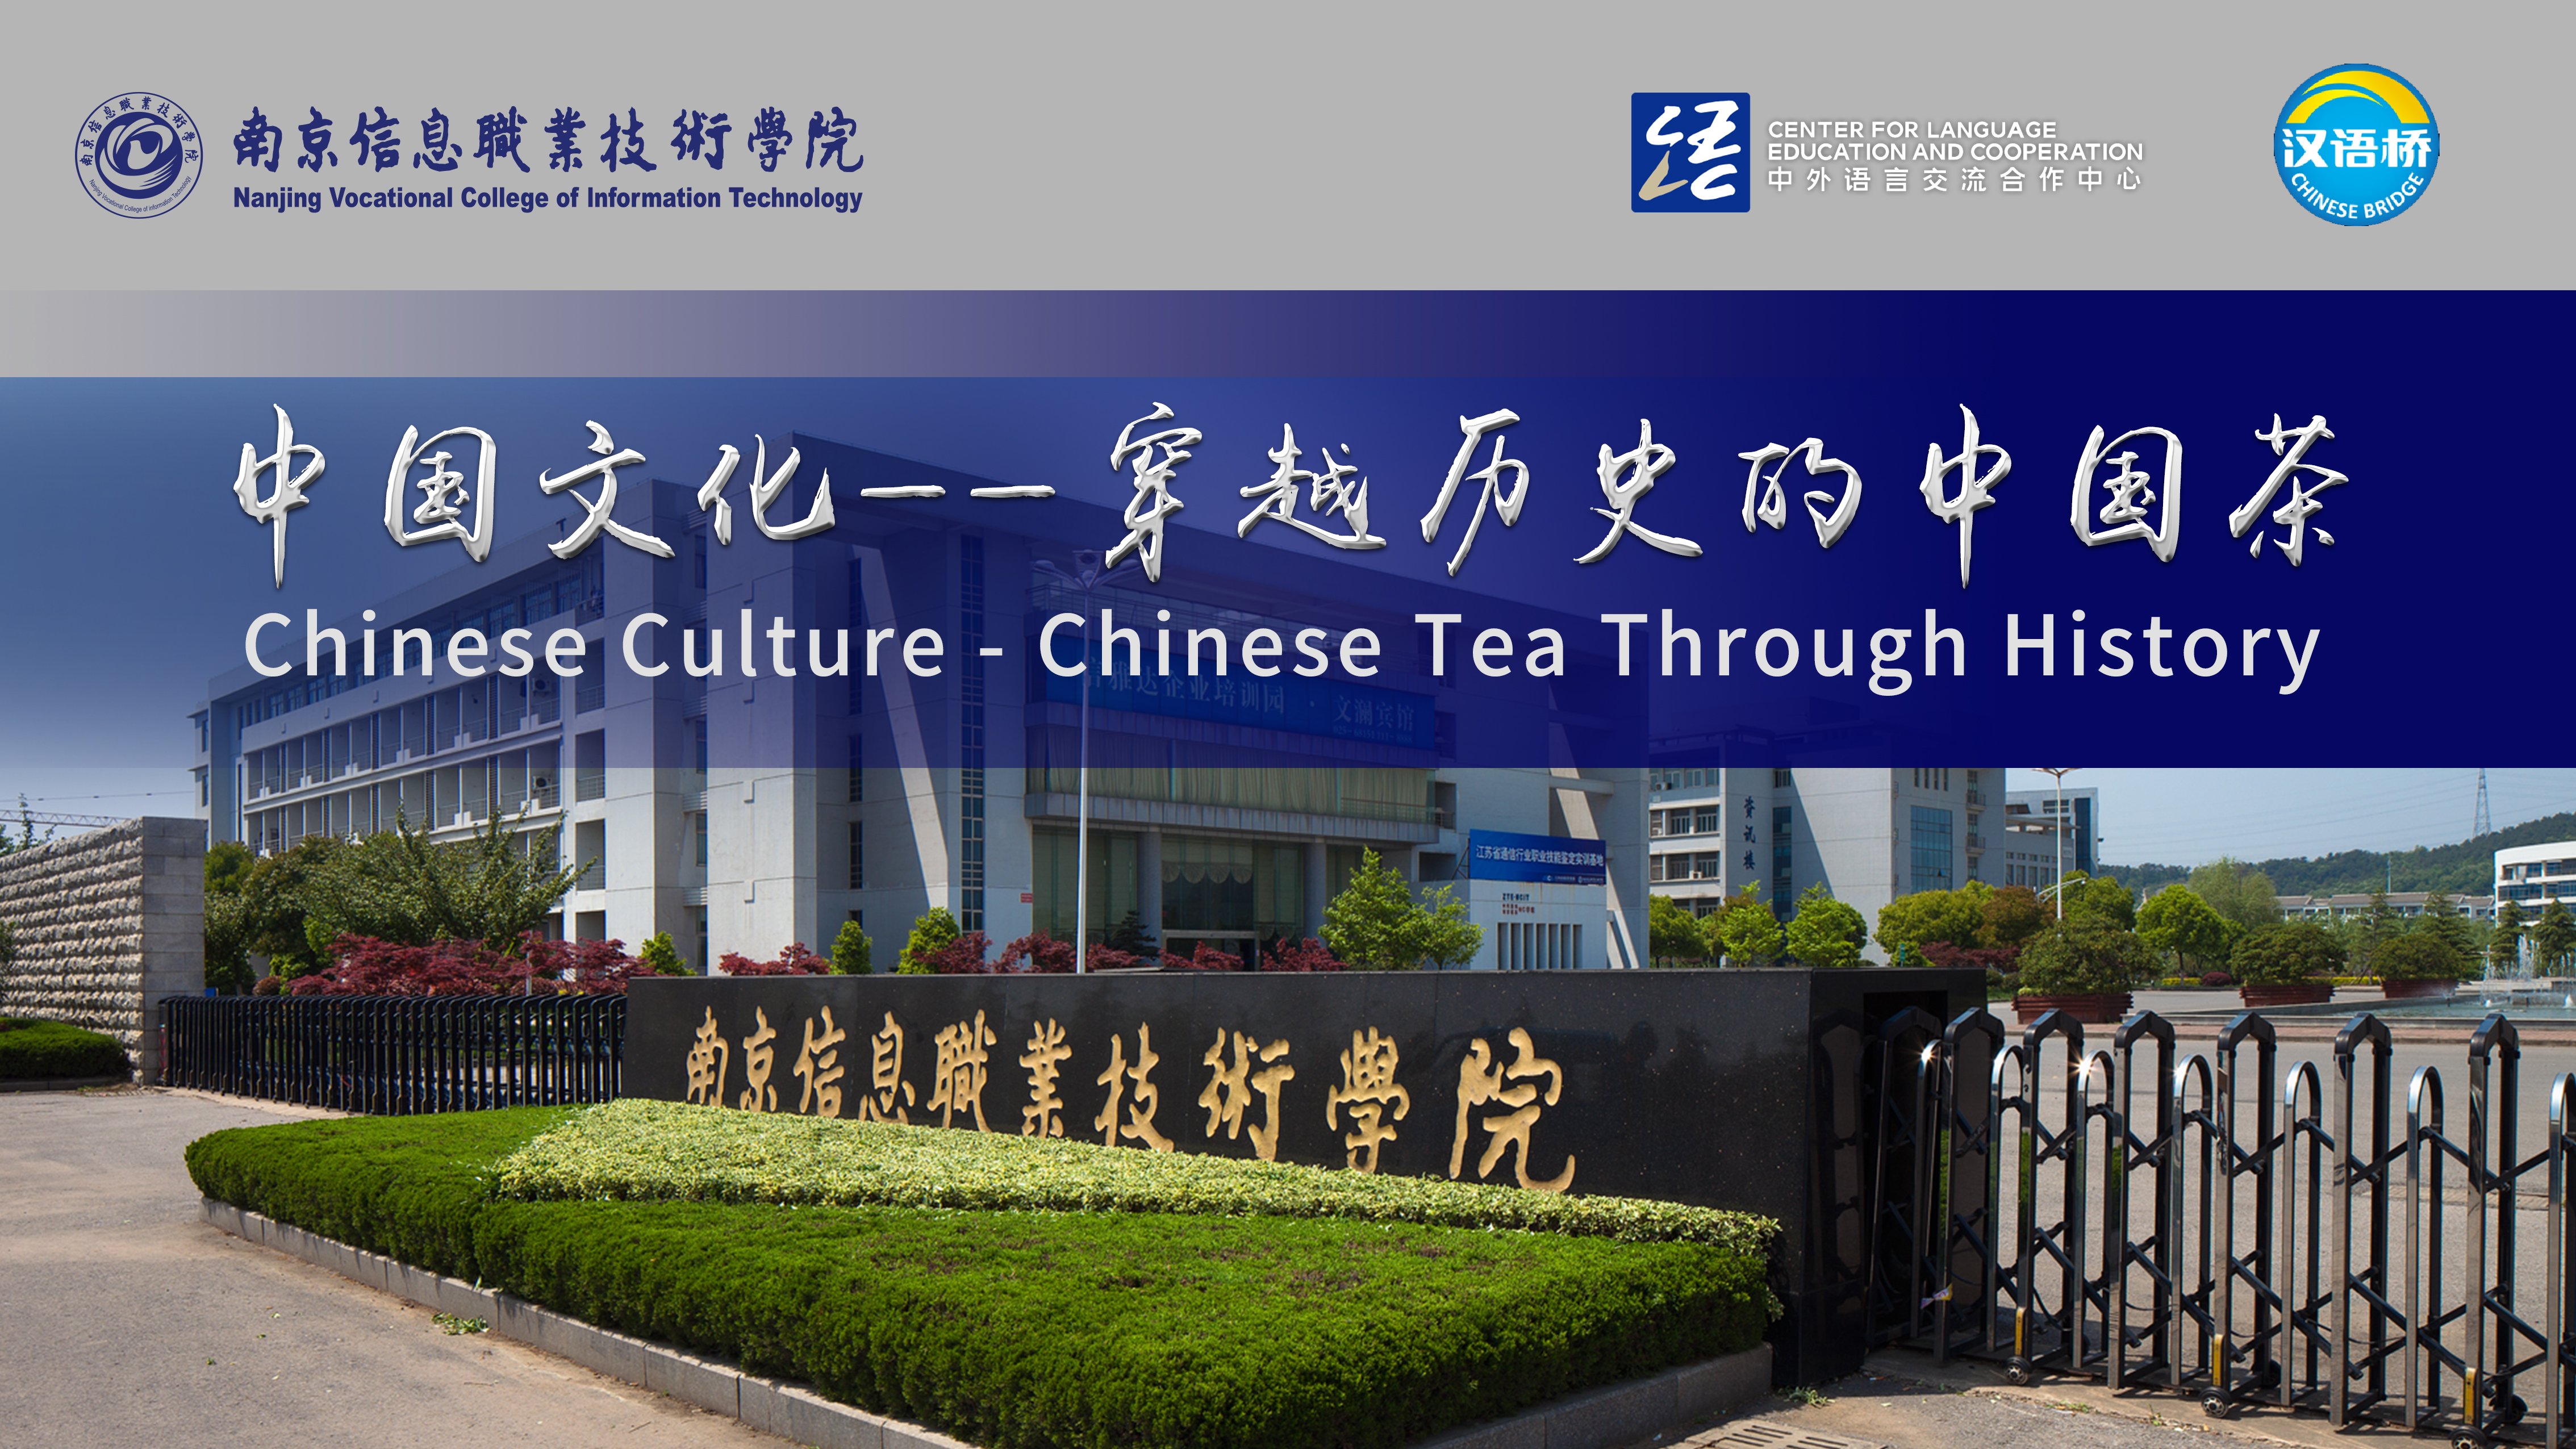 Chinese Culture - Chinese Tea Through History